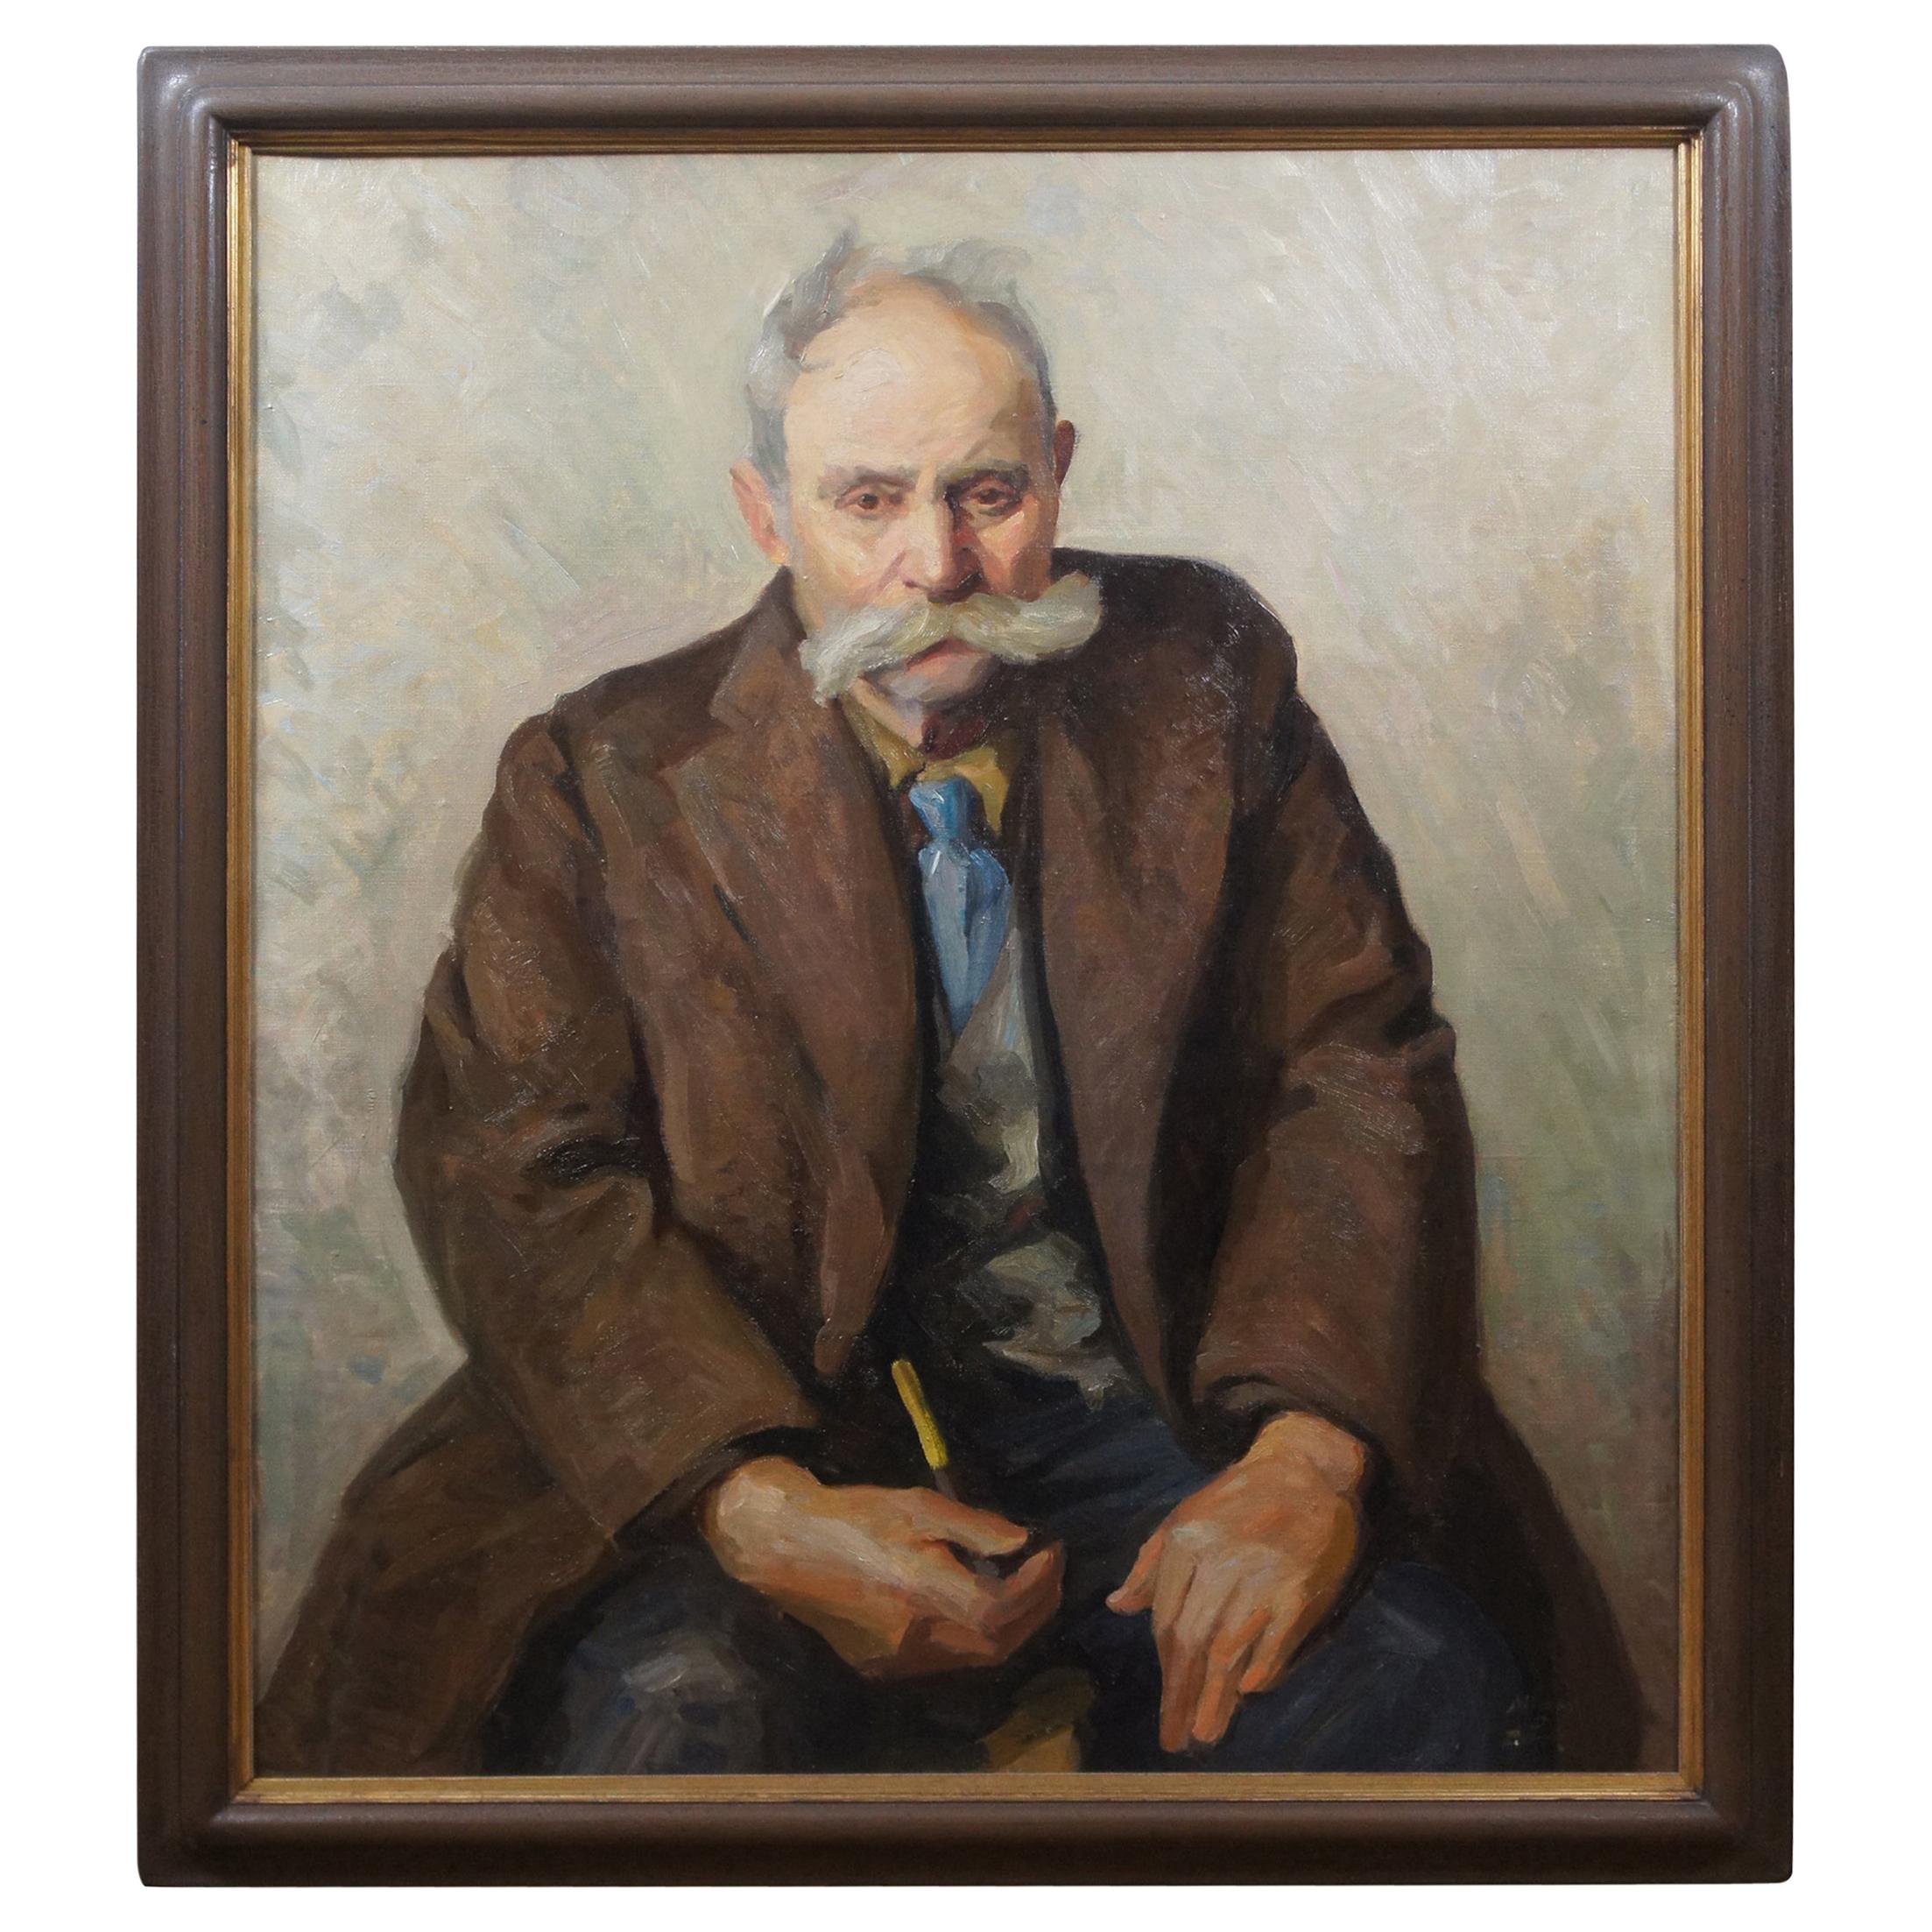 Milton D Birch 20th Century Canvas Oil Painting Portrait of Old Man Smoking Pipe